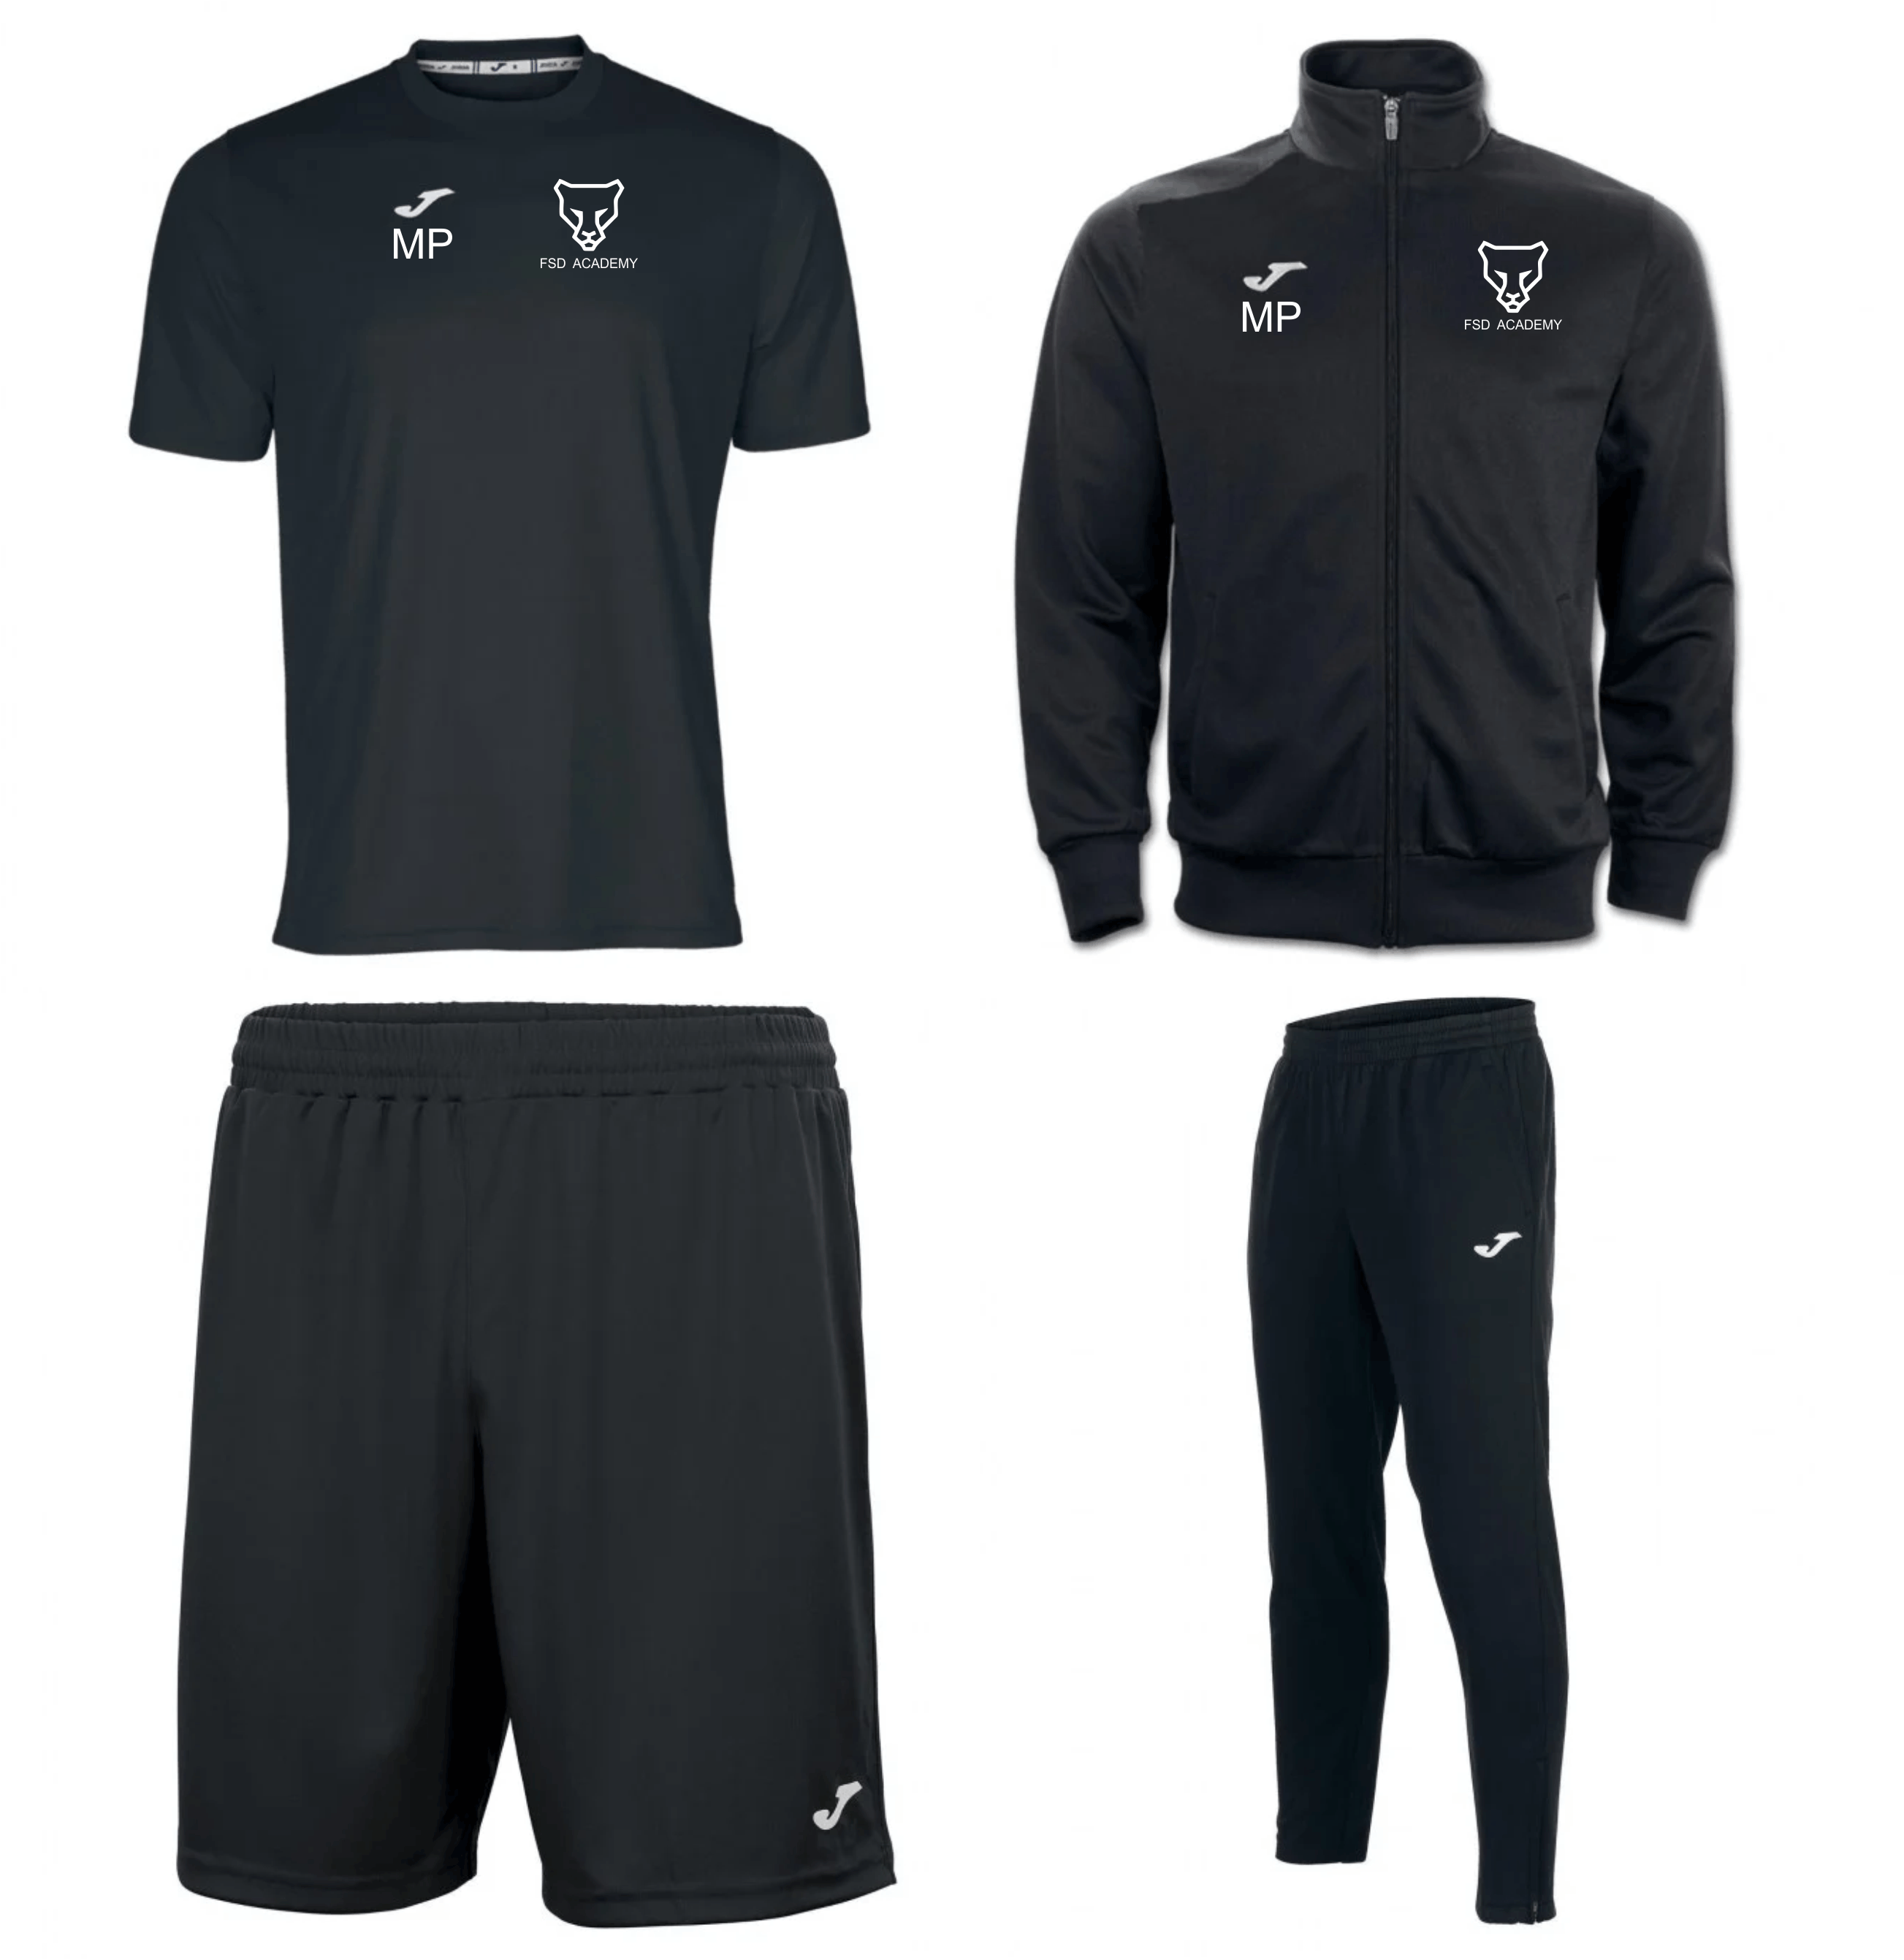 FSD Academy 2022/23 collection 1. (£35 deposit now, £30 payment later for item to be shipped)